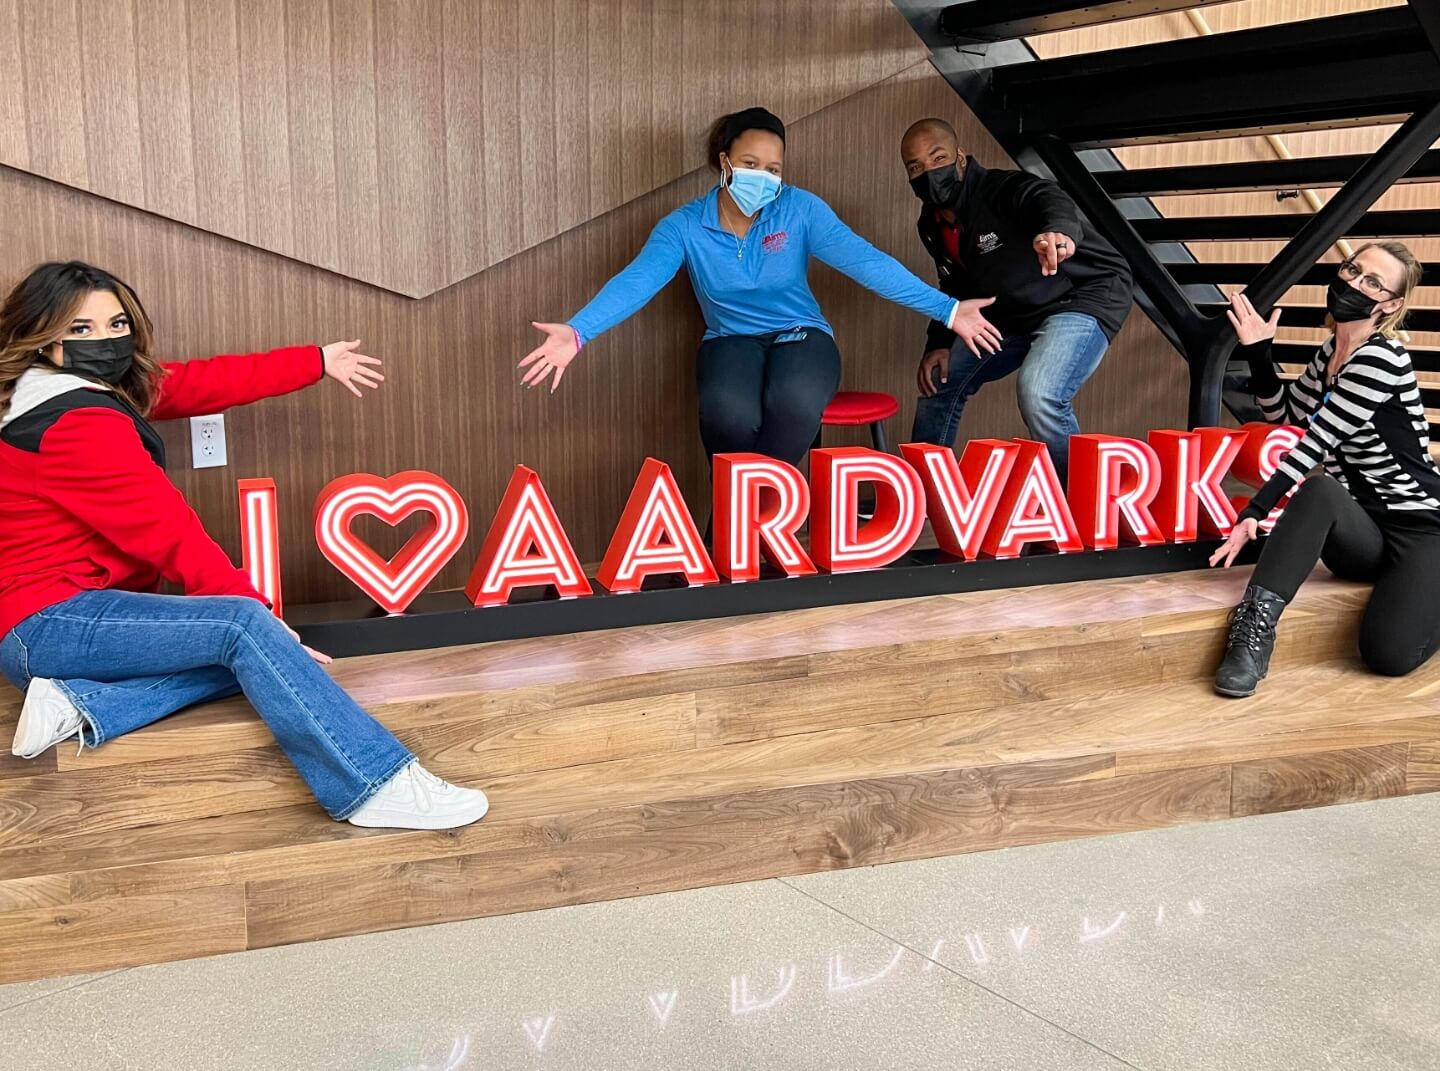 Masked Aims Community College students pose around a neon sign in a campus common area, the sign reads "I heart aardvarks"